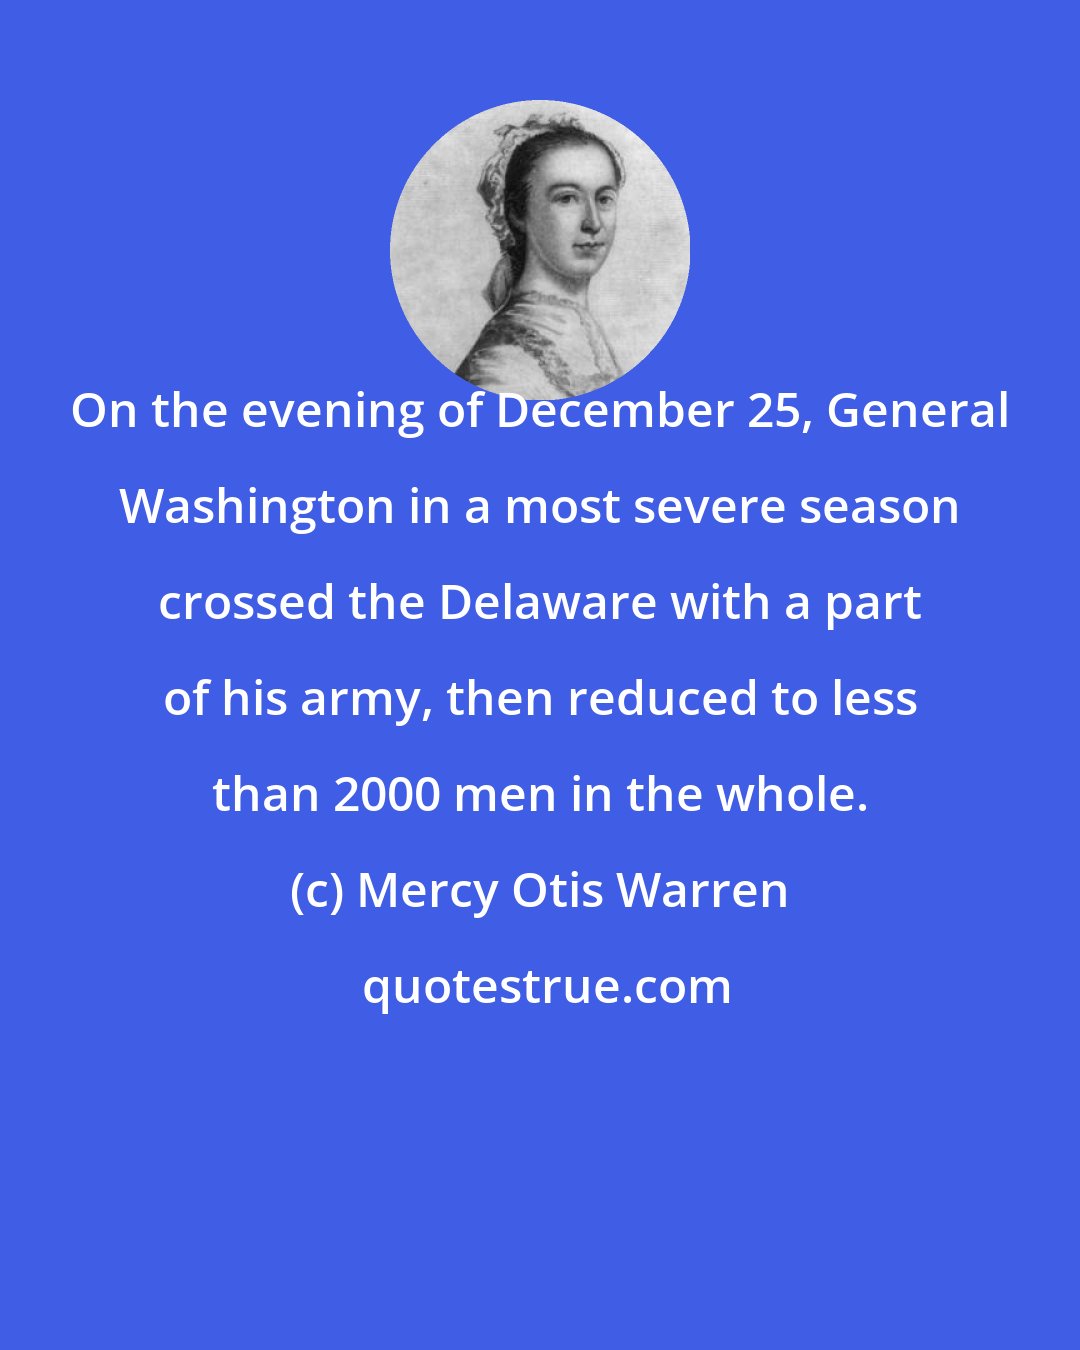 Mercy Otis Warren: On the evening of December 25, General Washington in a most severe season crossed the Delaware with a part of his army, then reduced to less than 2000 men in the whole.